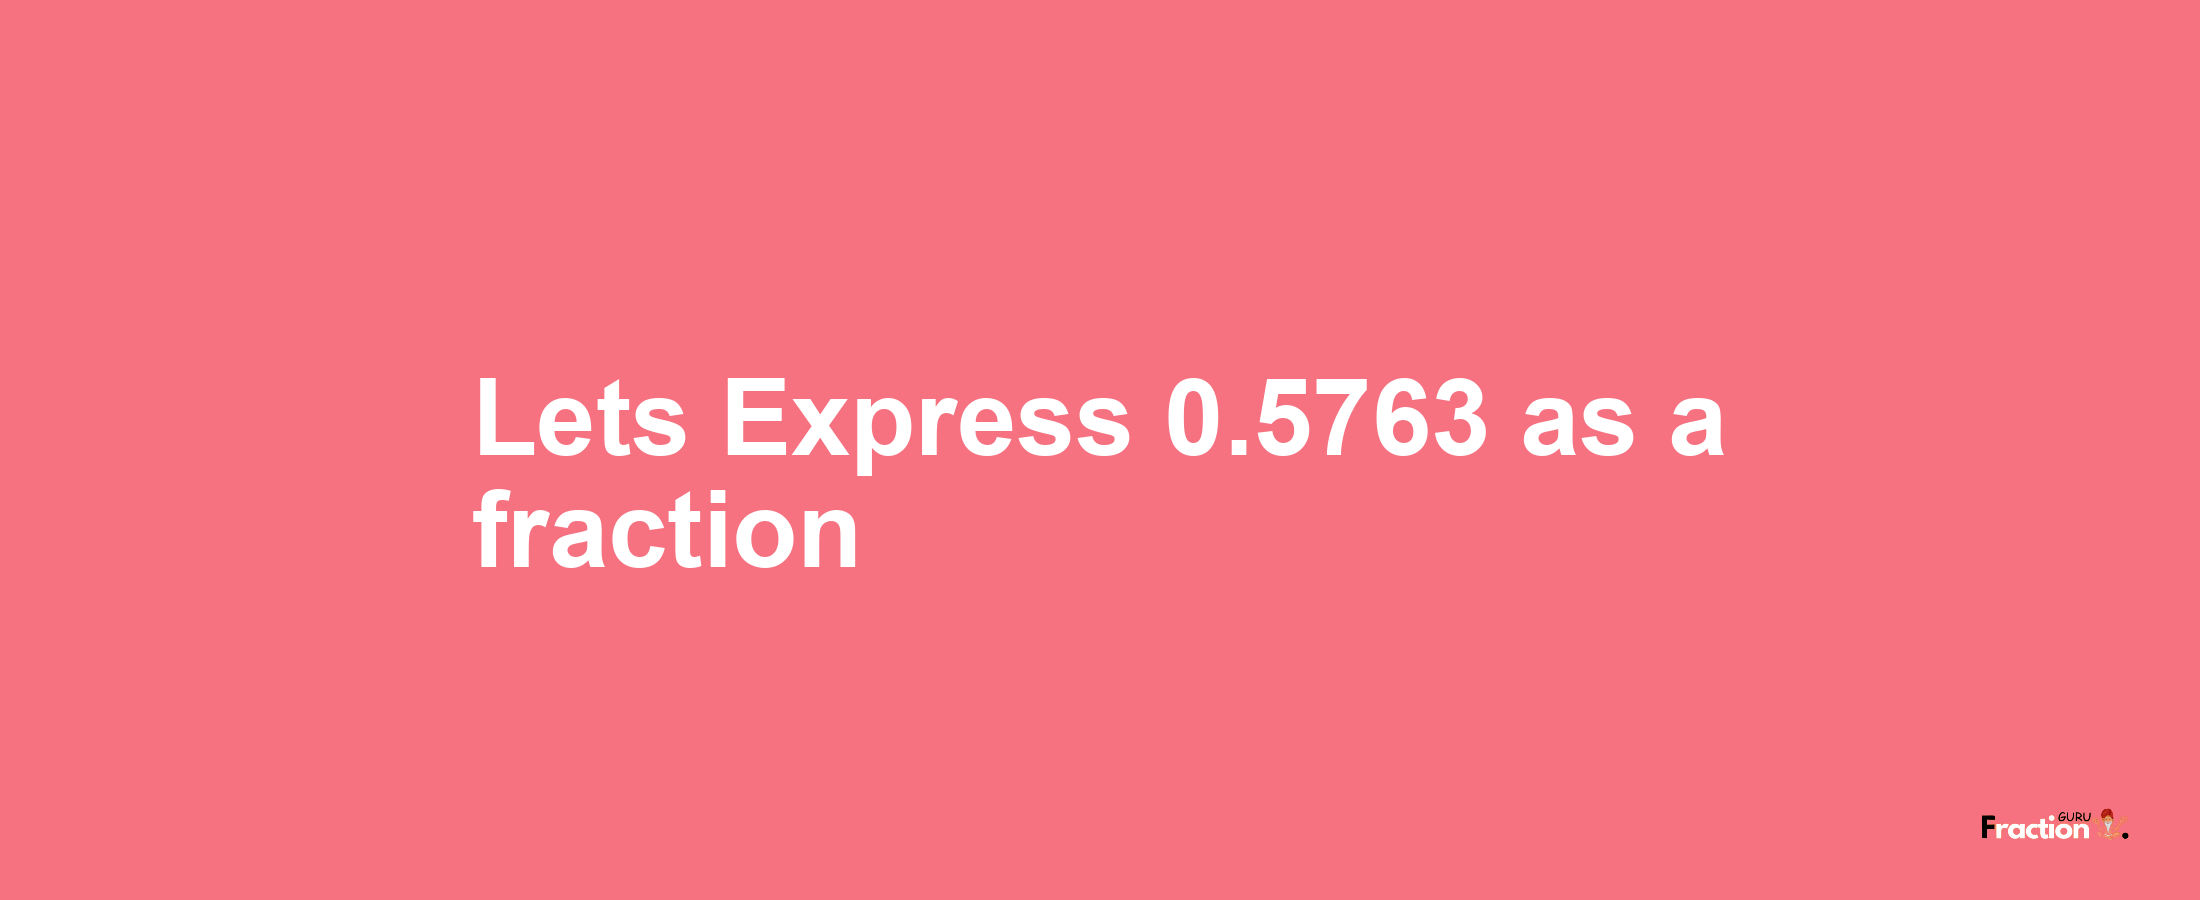 Lets Express 0.5763 as afraction